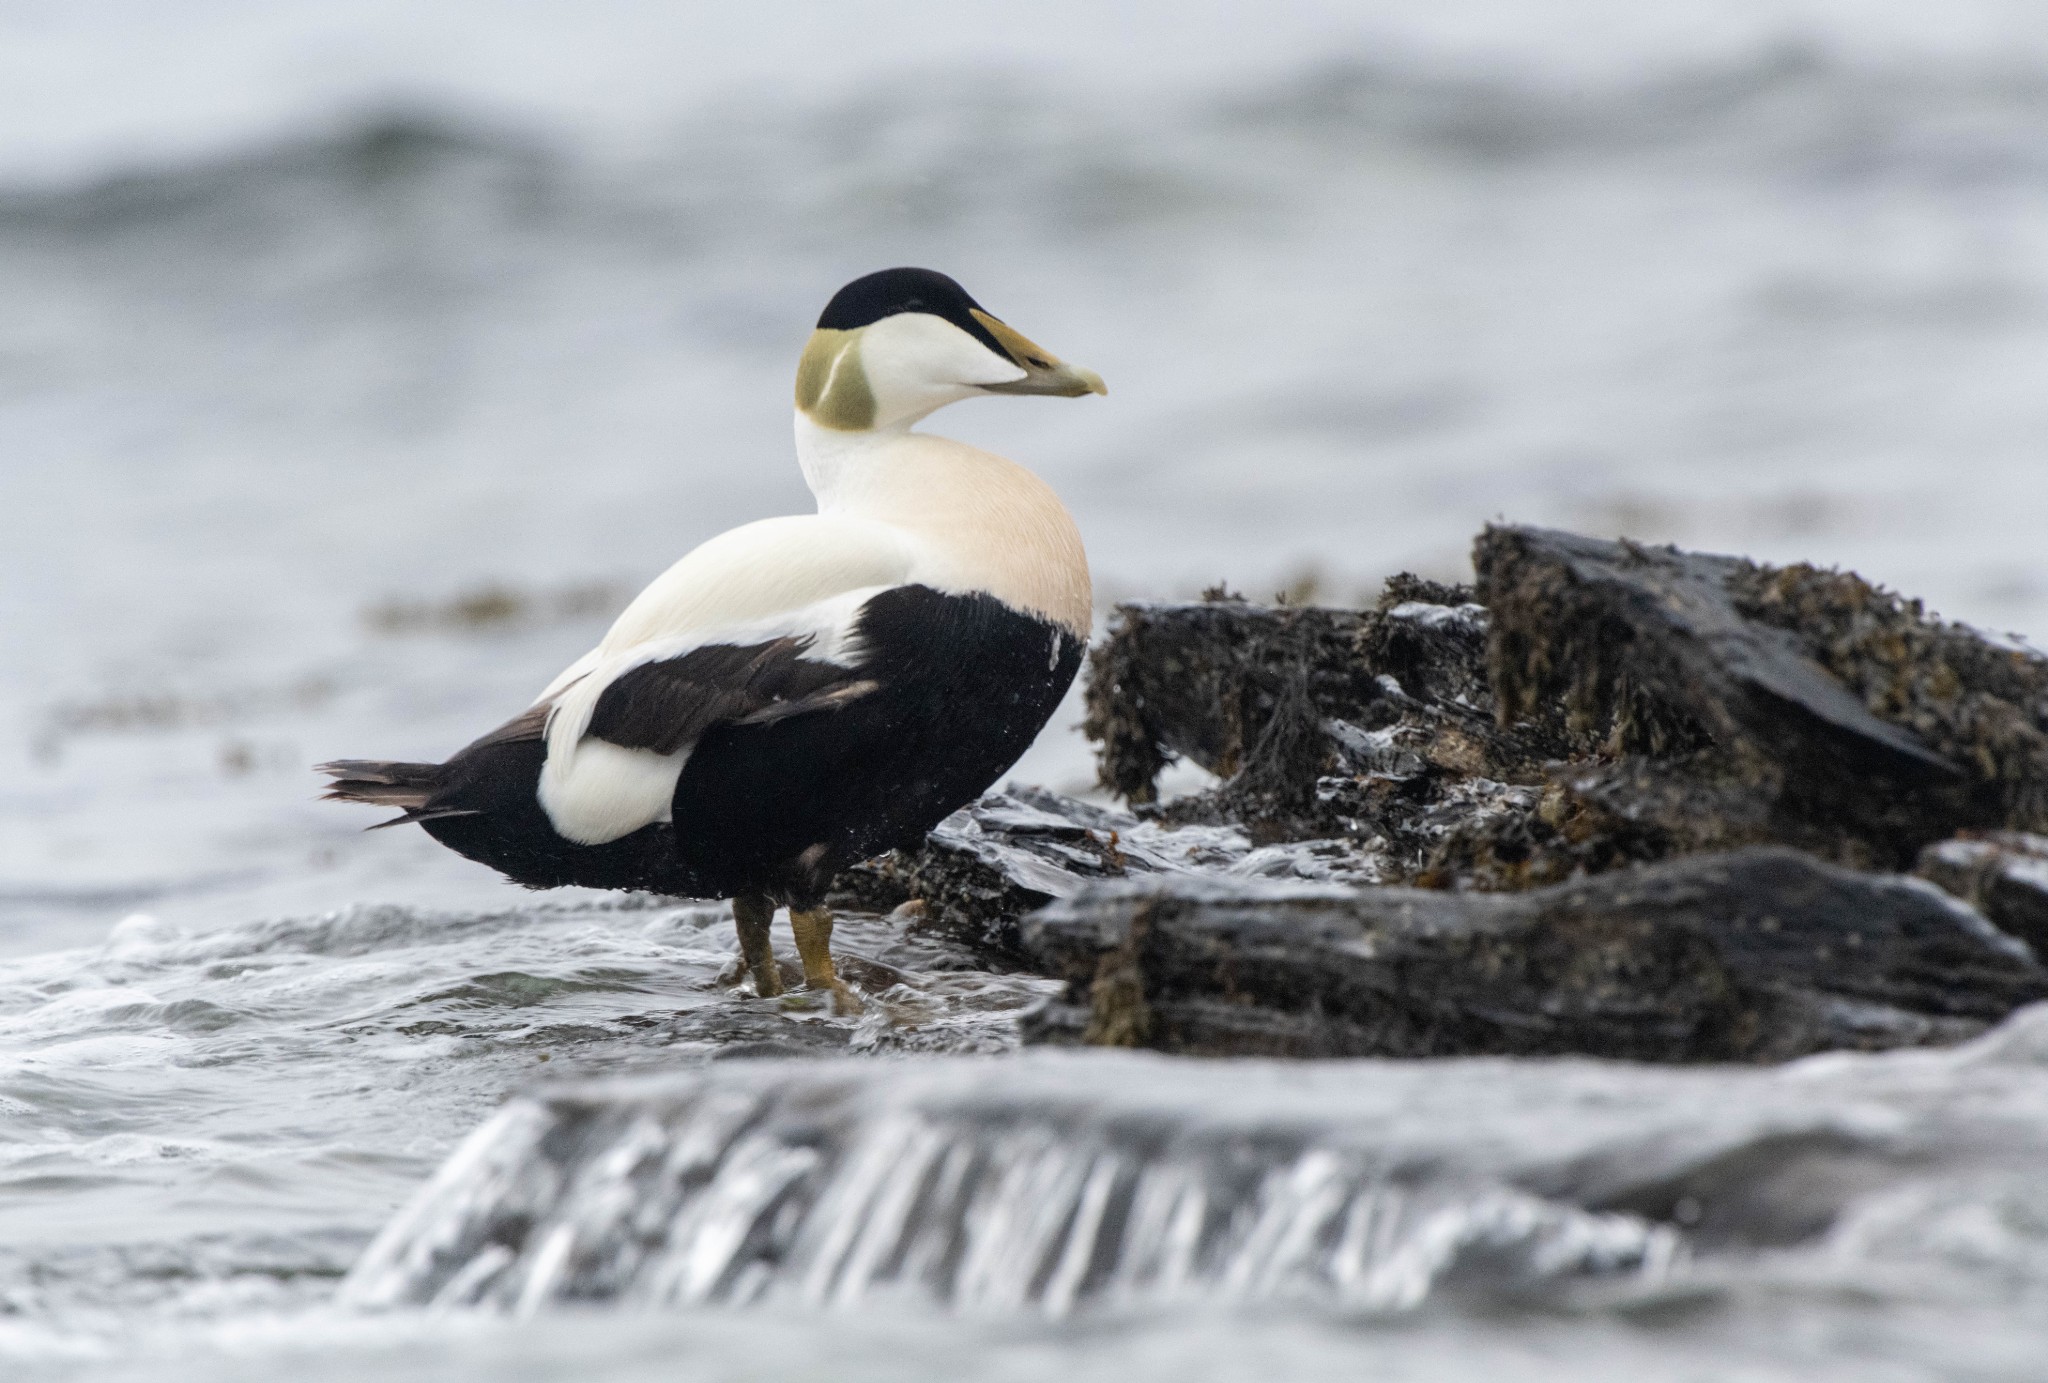 Eider duck in Orkney - image by Raymond Besant